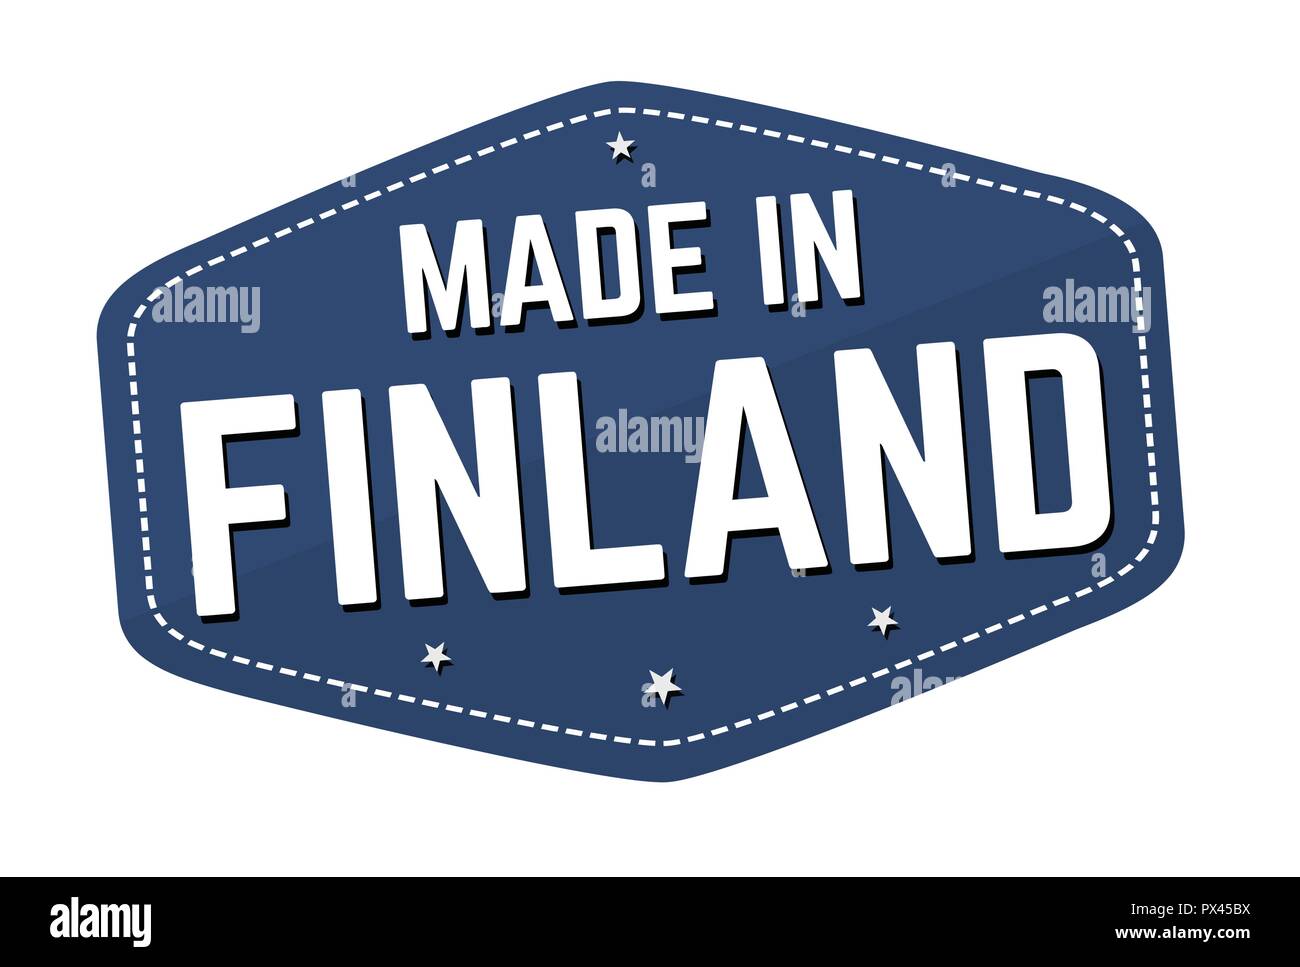 Made in Finland label or sticker on white background, vector illustration Stock Vector